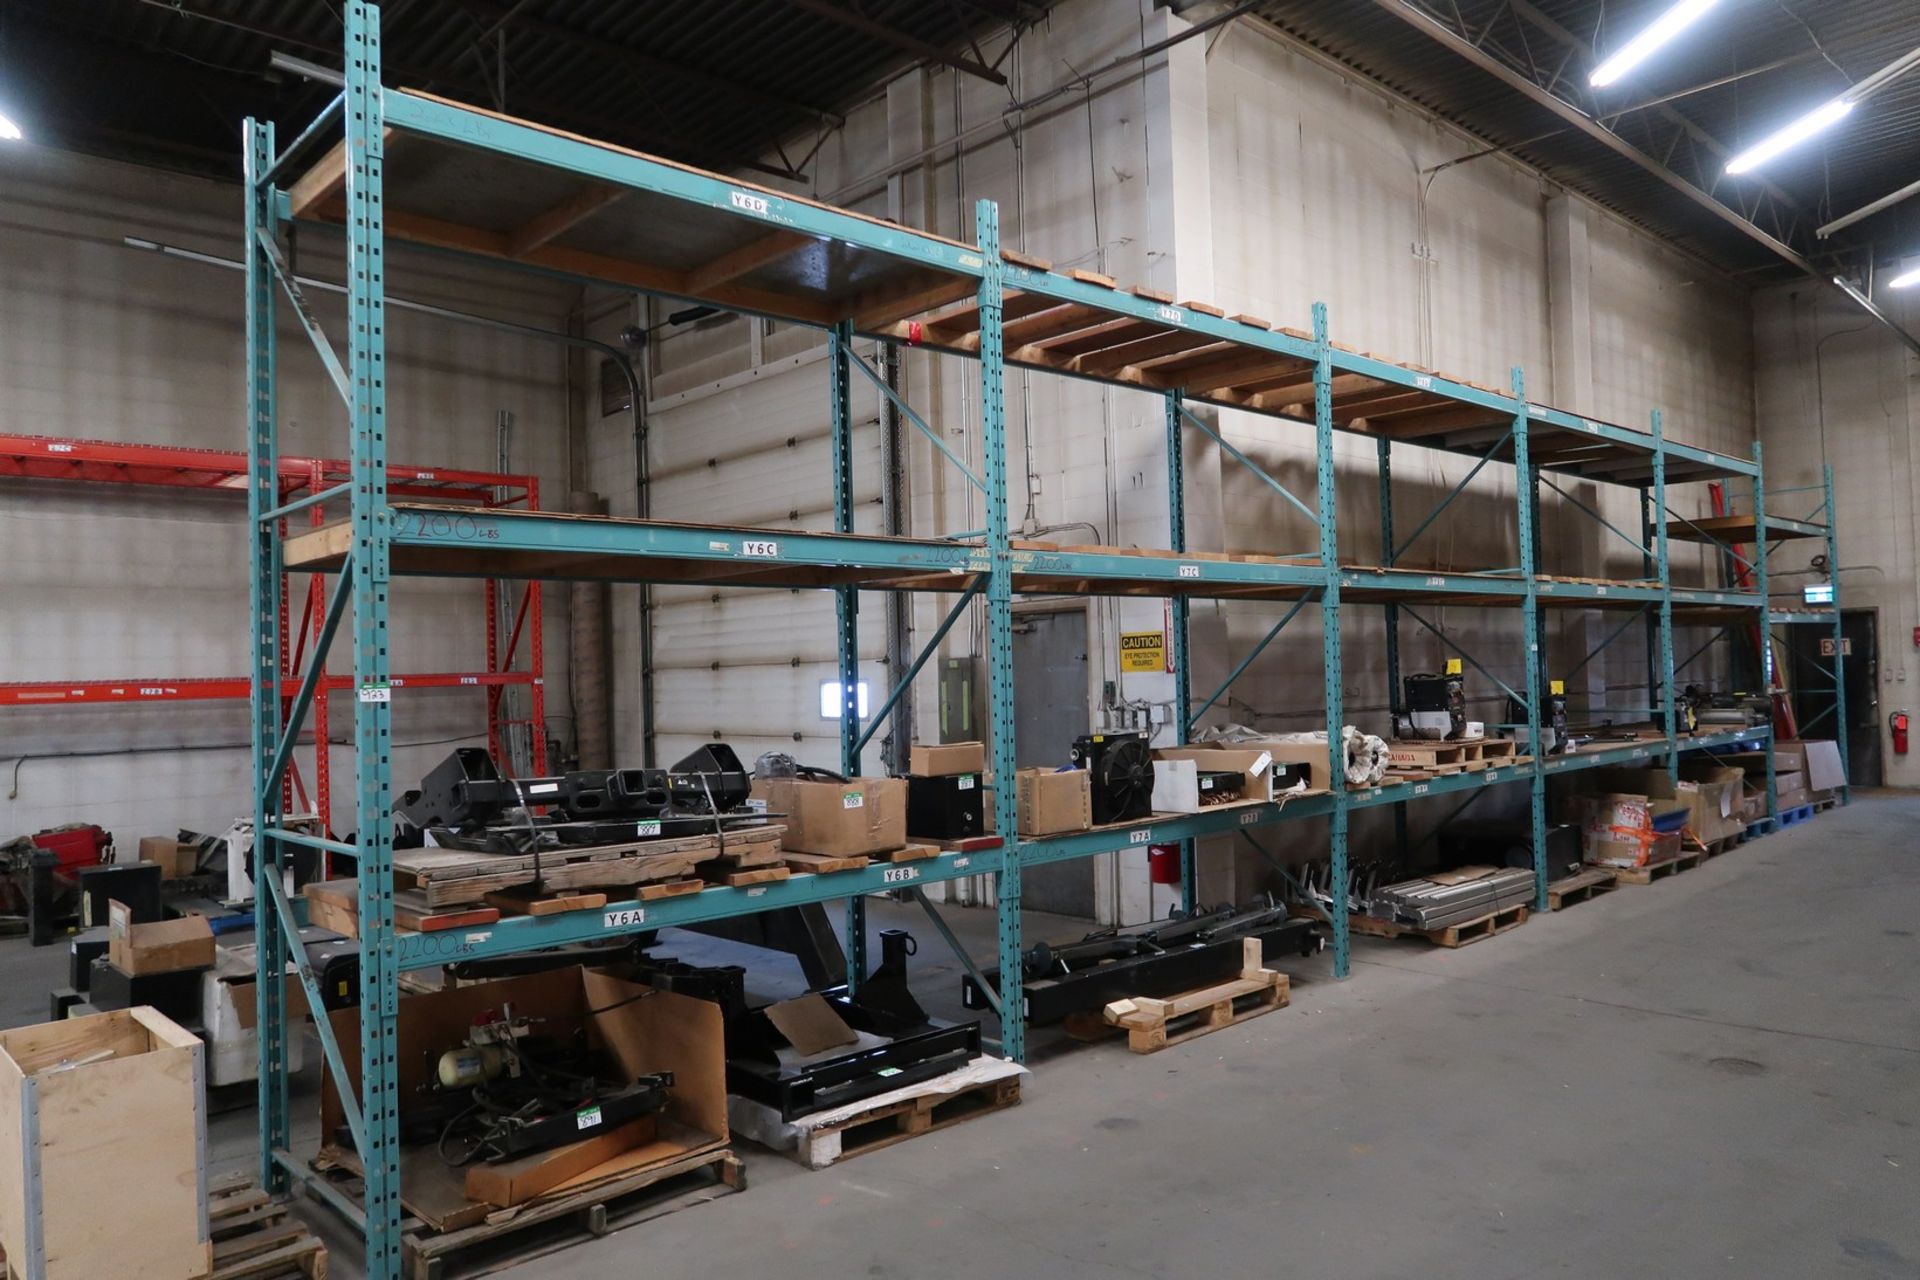 6 SECTIONS OF PALLET RACKING